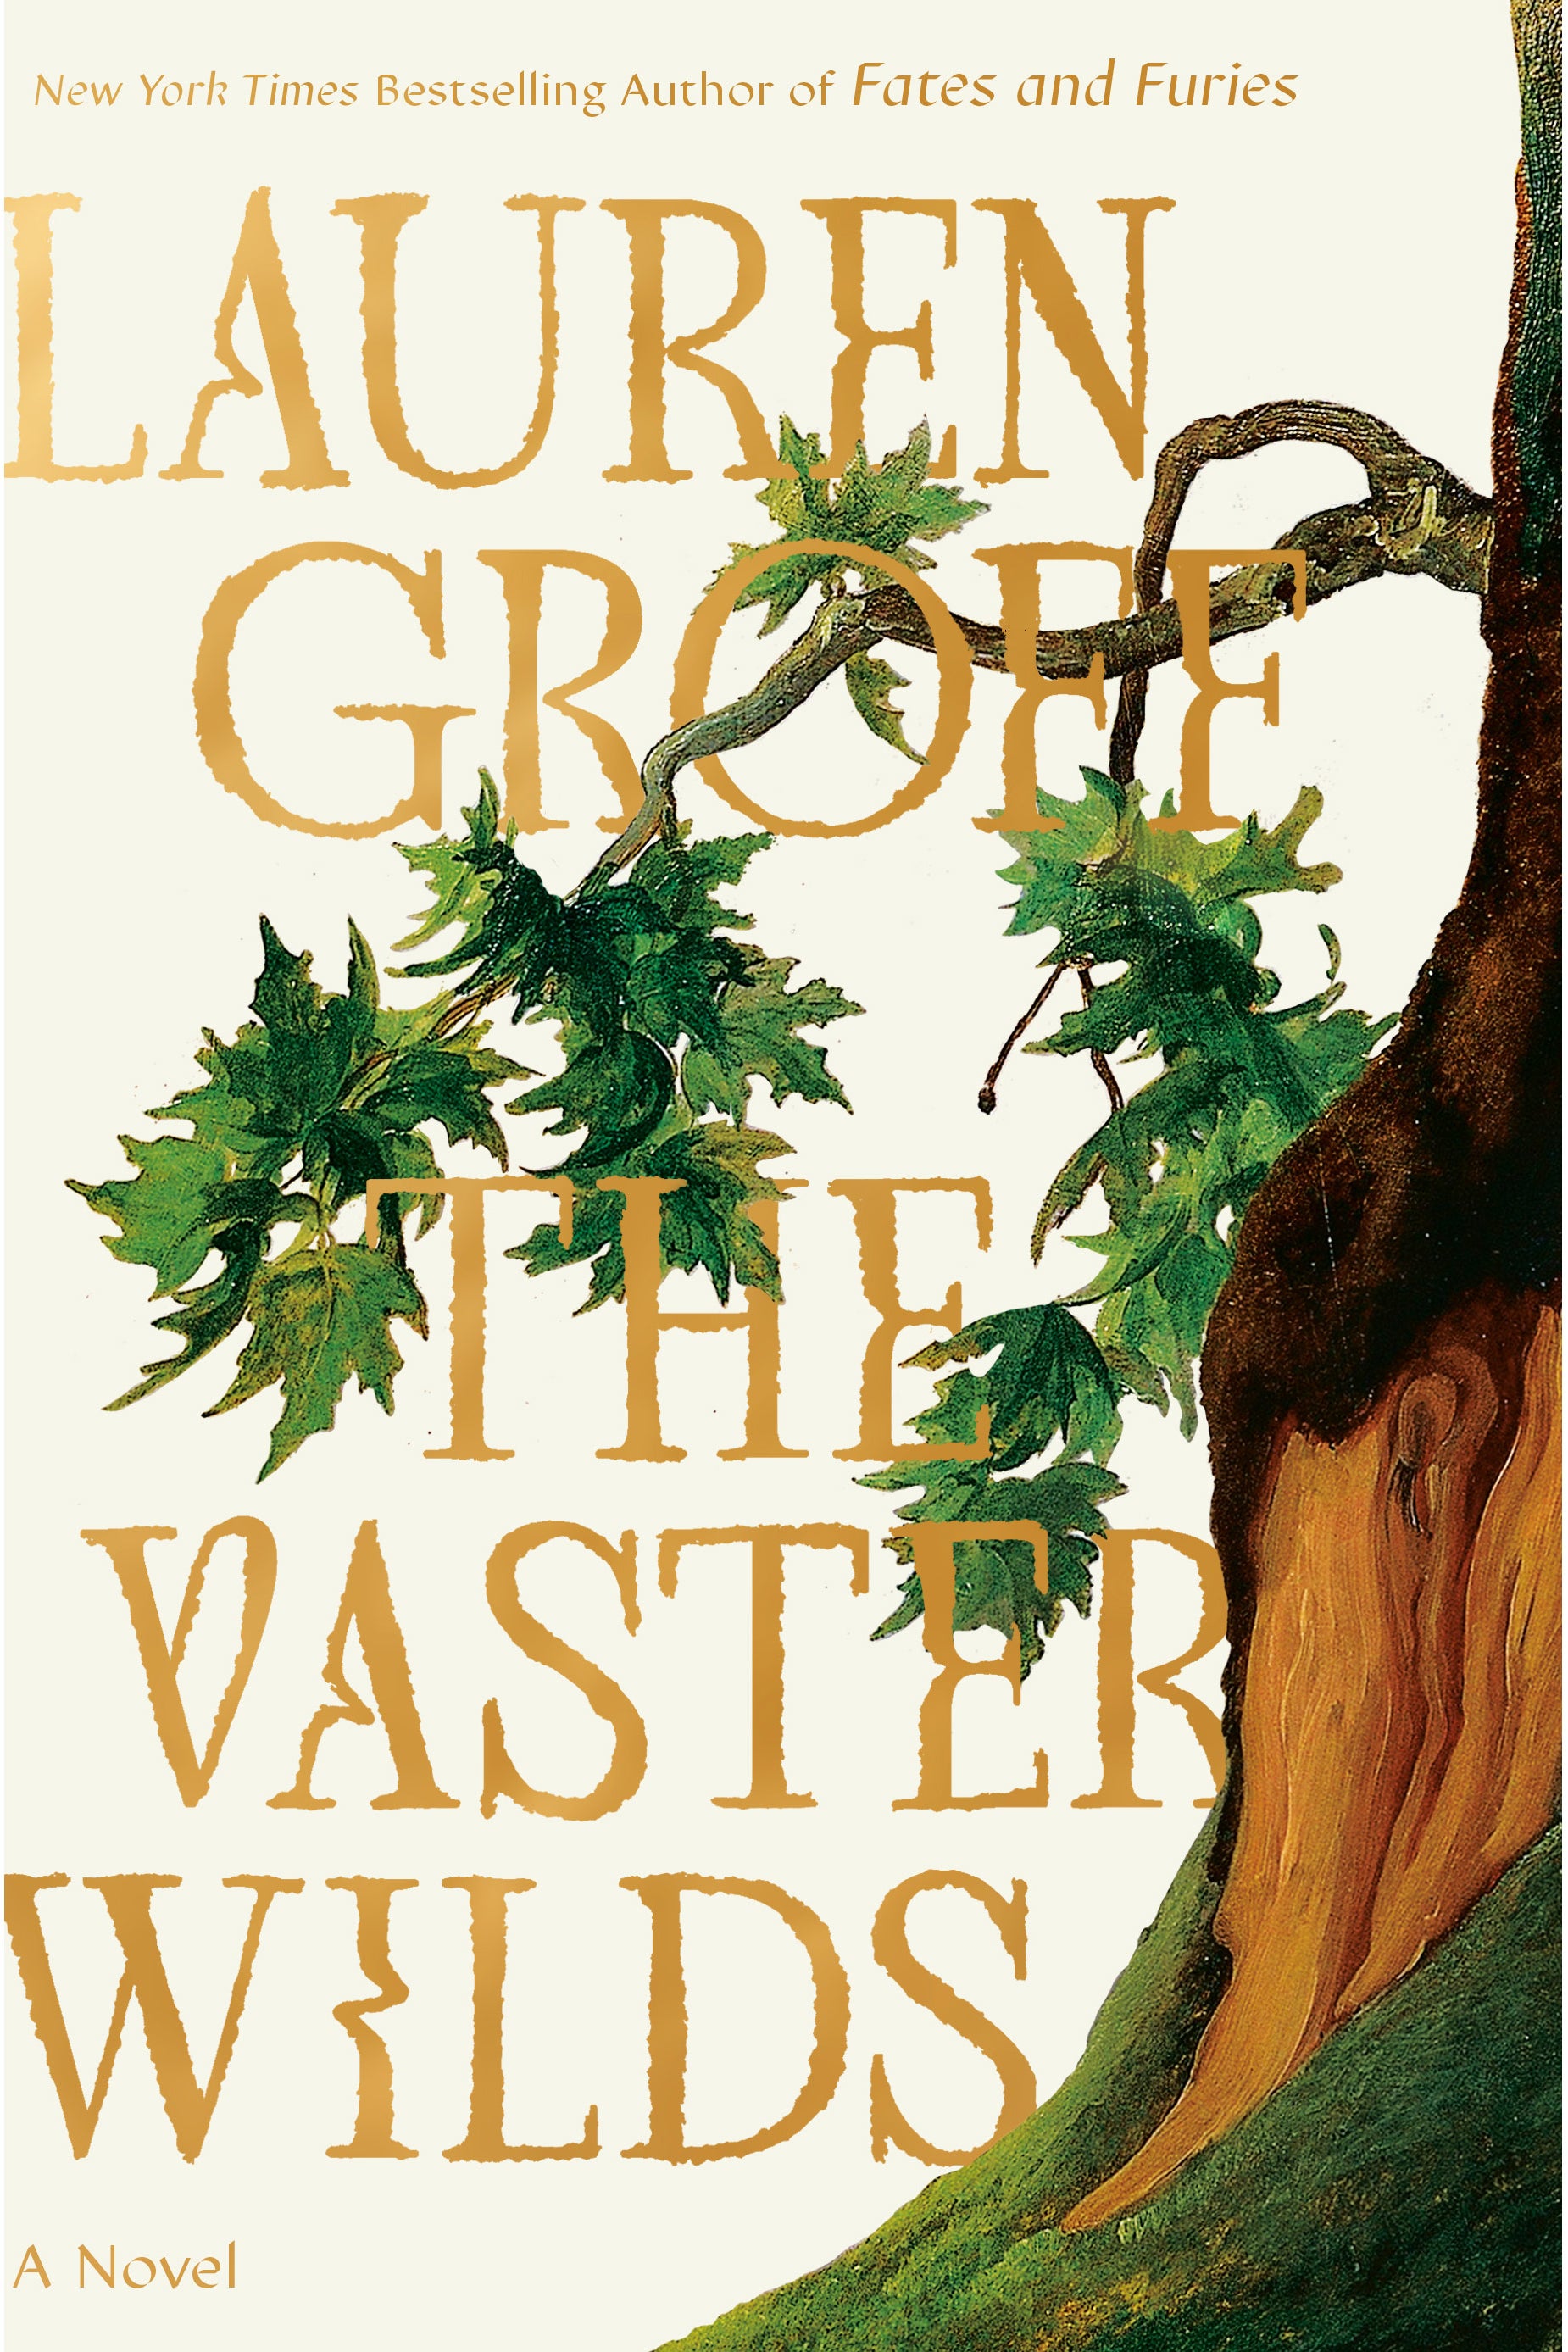 The book jacket of The Vaster Wilds.